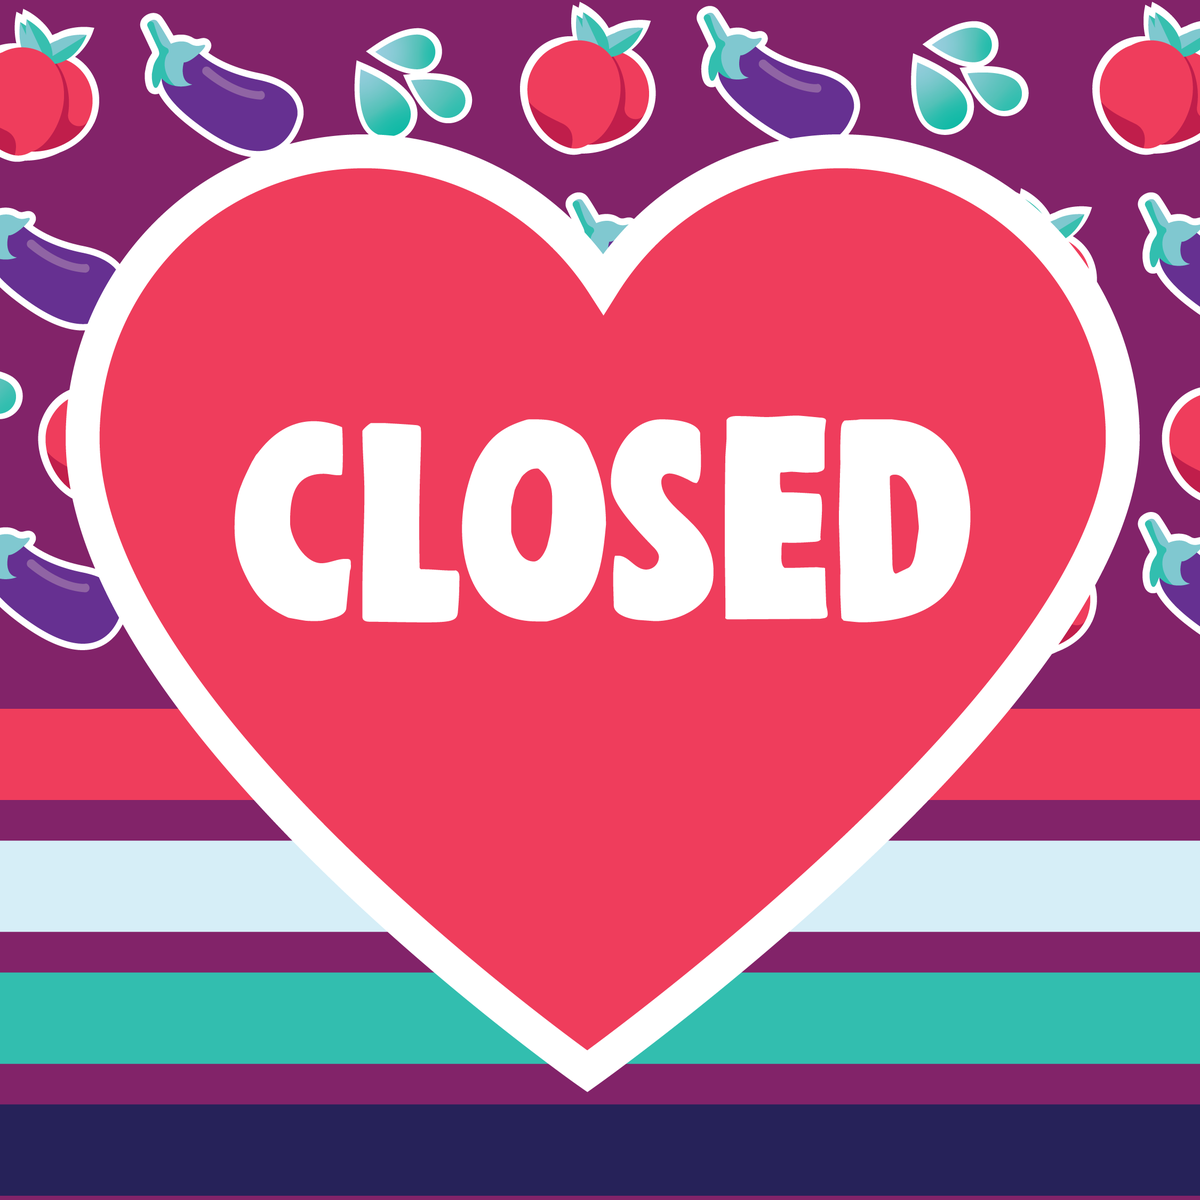 Lodge closed (May 20th) for harm reduction and safe sex supplies. 

#GoAskAuntie 
#WinnipegClinic 
#SexualHealthClinic 
#SexualHealthAwareness
#GetTested
#STBBIAwareness
#SexualHealth
#SexualWellness
#StopTheStigma
#SexualHealthServices
#IndigenousSexualHealth
#IndigenousClinic